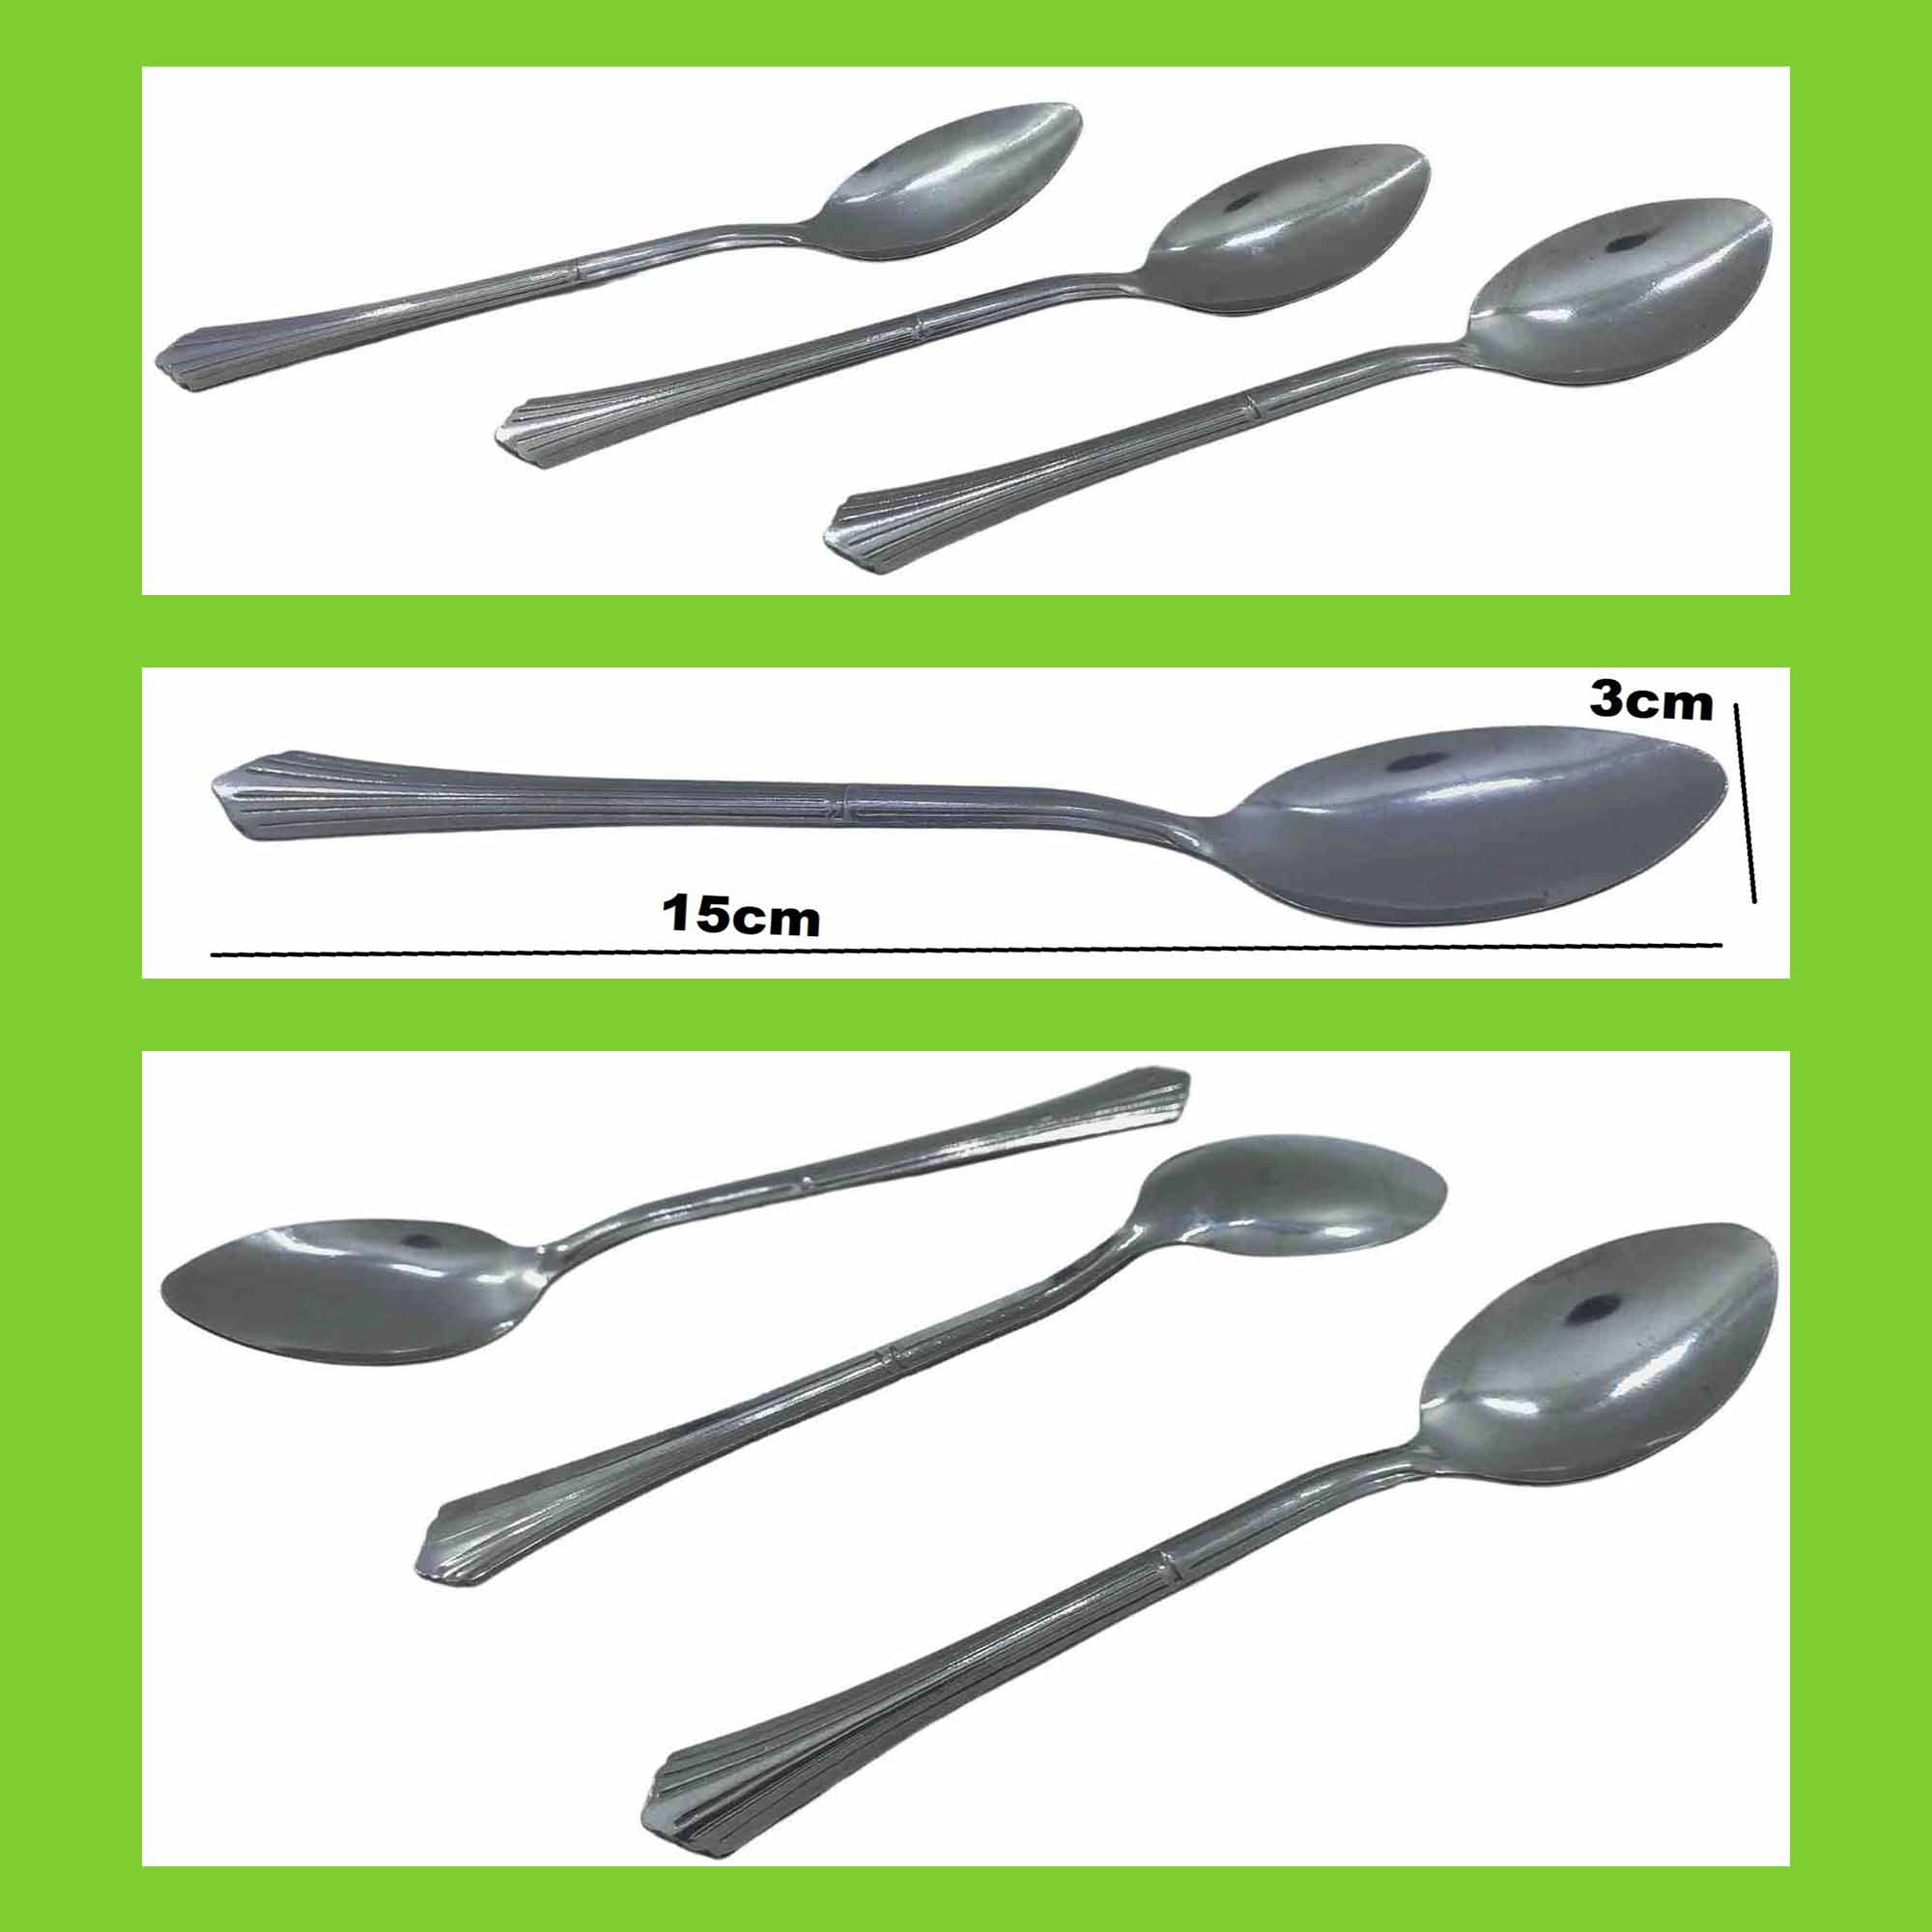 Tea Spoons Made of Stainless Steel - Stylish Cutlery (Line)